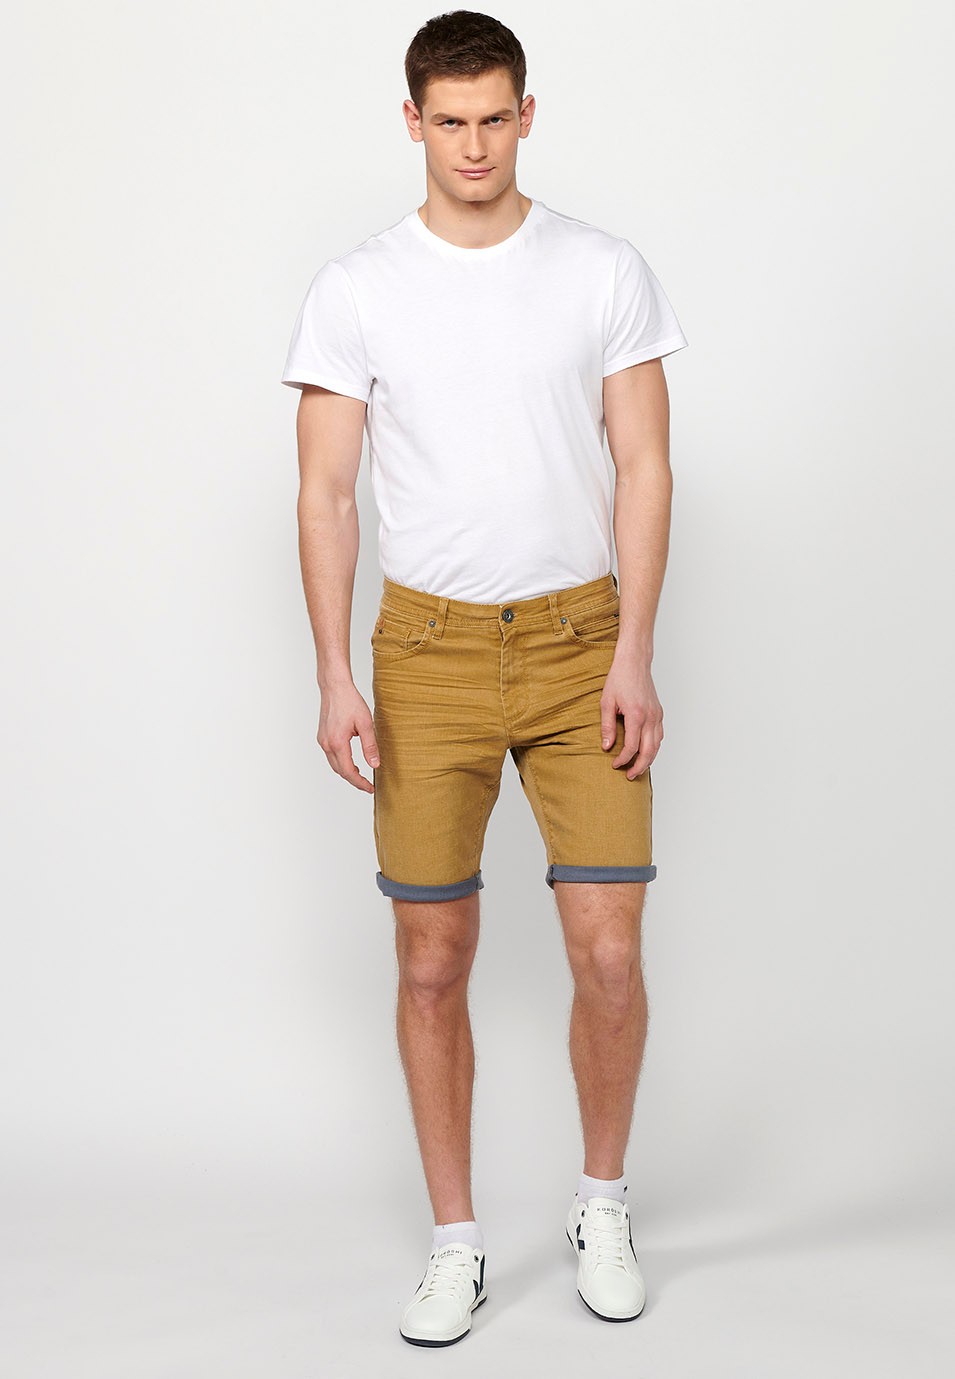 Denim Bermuda shorts with turn-up finish, front closure with zipper and button, with five pockets, one pocket pocket, Ocher Color for Men